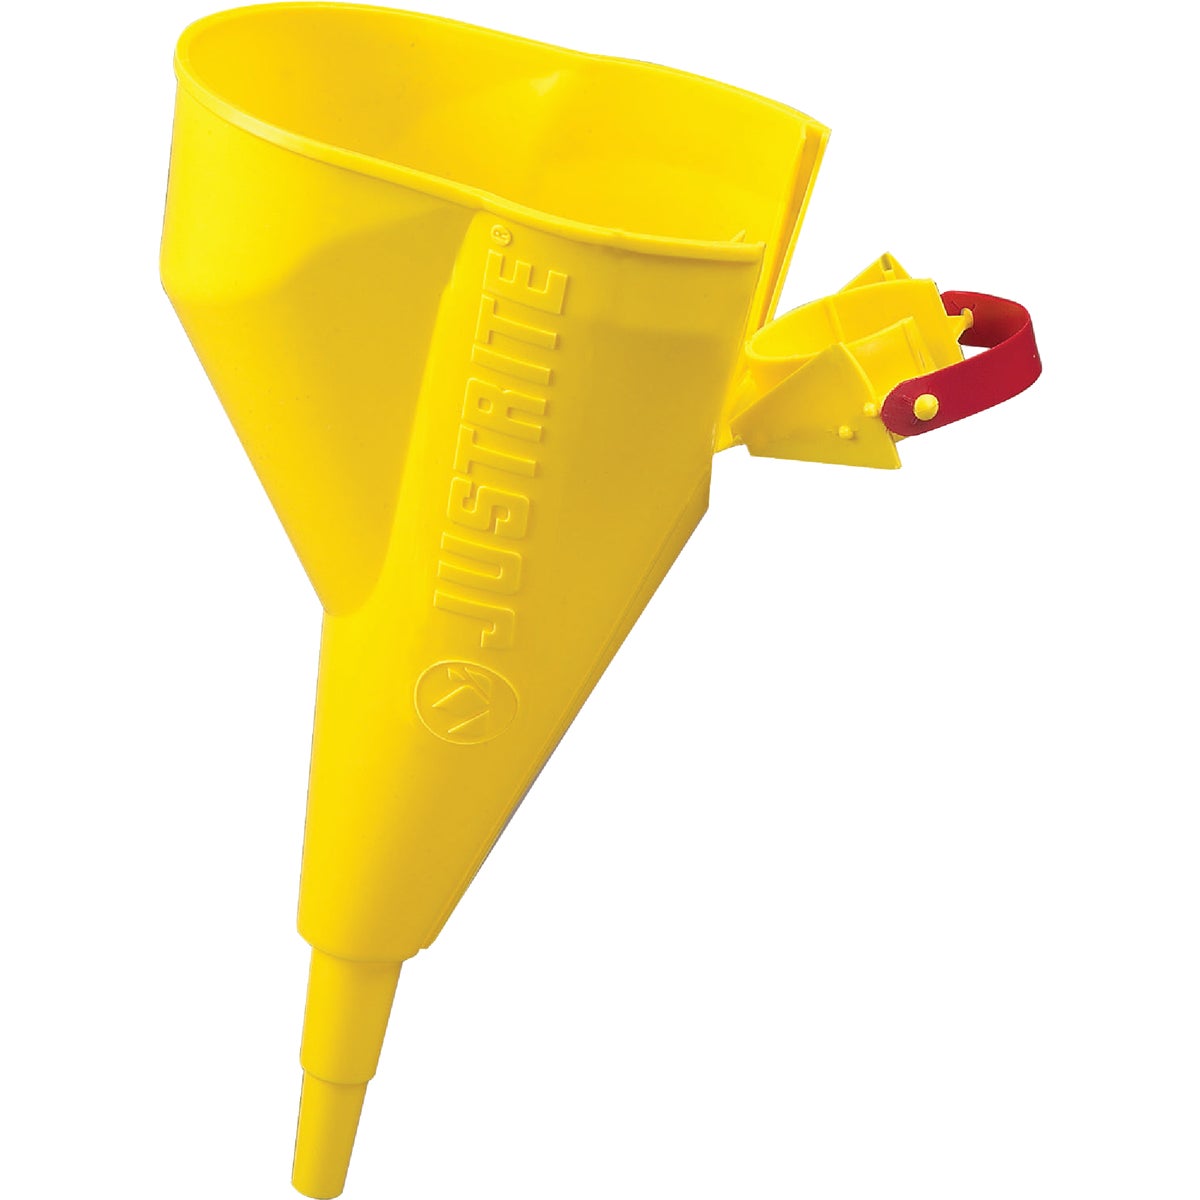 Item 570415, Type I safety can funnel.